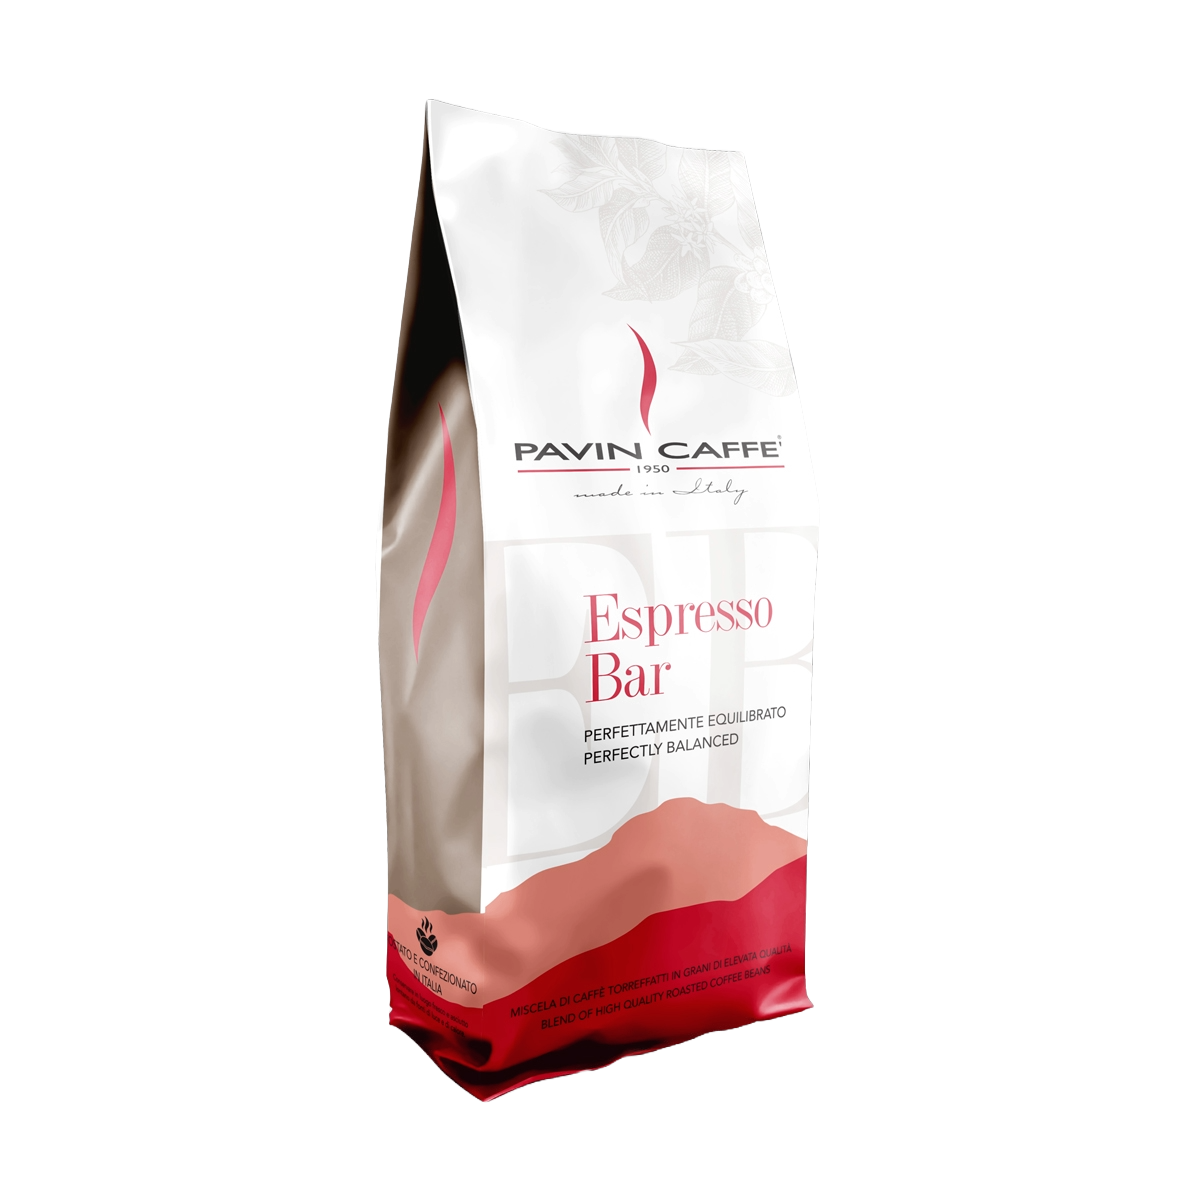 Pavin Caffe Espresso Beans Promotion - Variety Pack 5kg   2 Espresso Bar  and 3 Full Cream